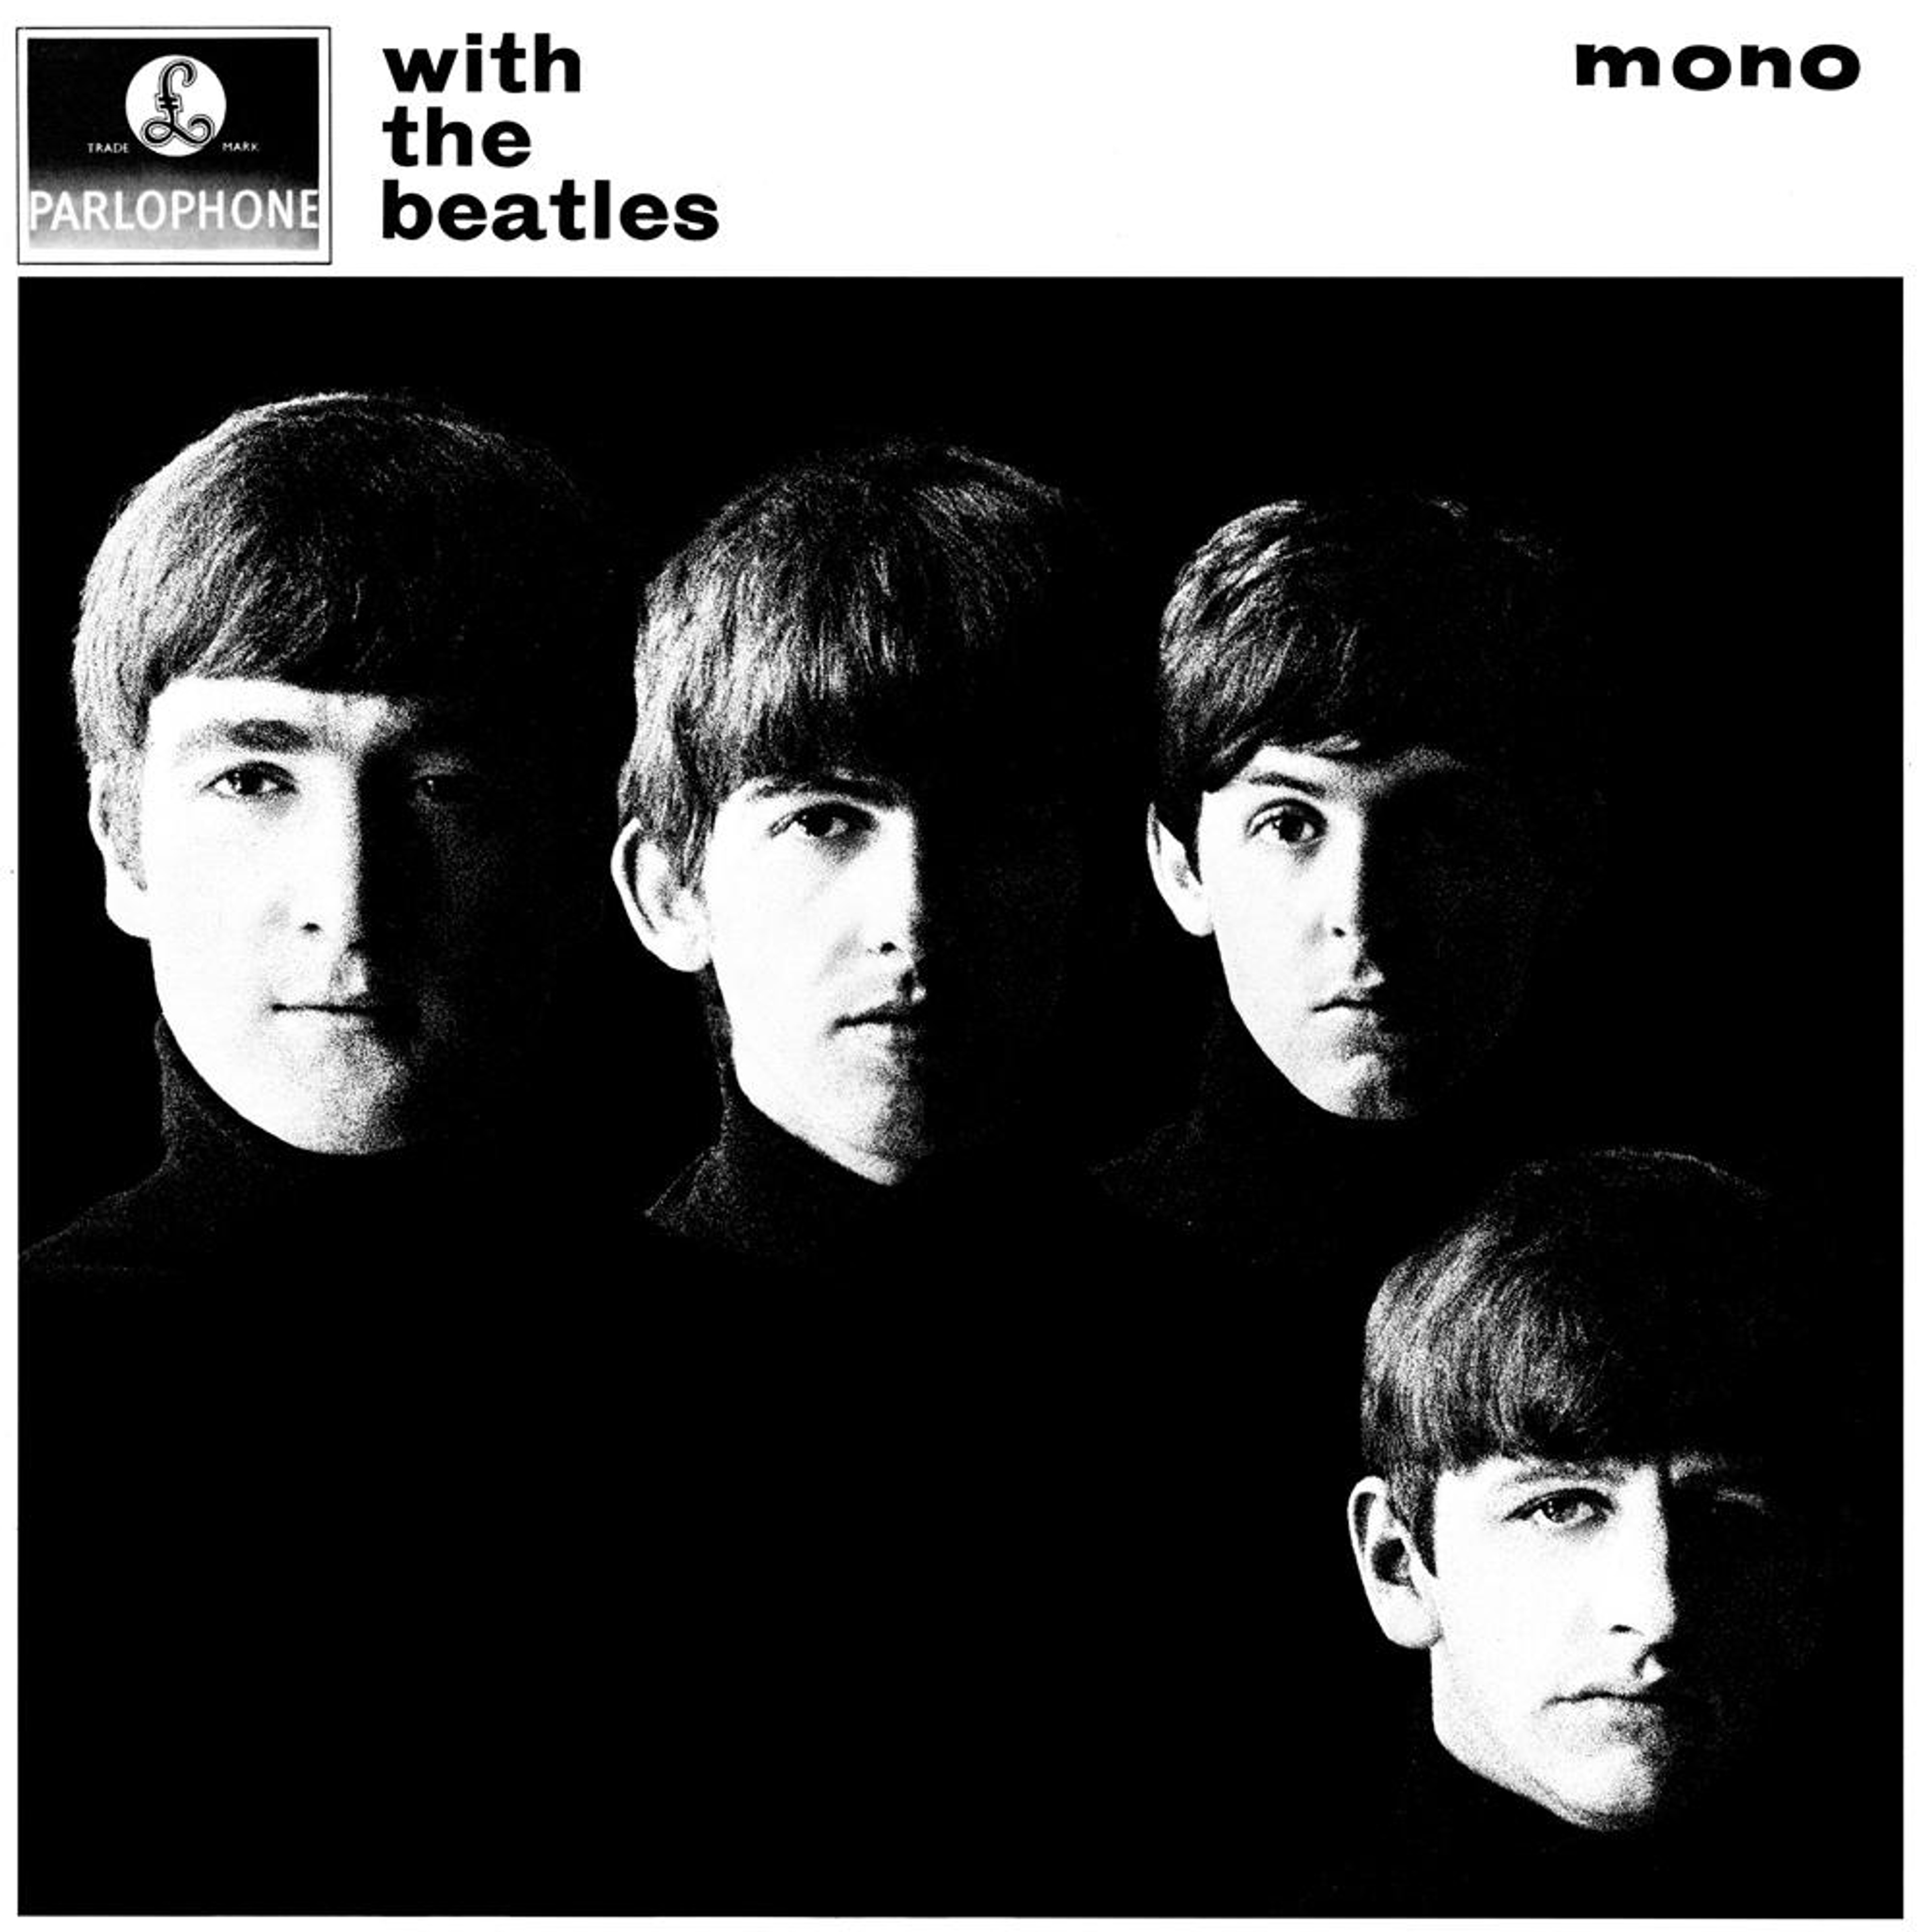 Photo of the cover art for 'Meet The Beatles' taken by Robert Freeman